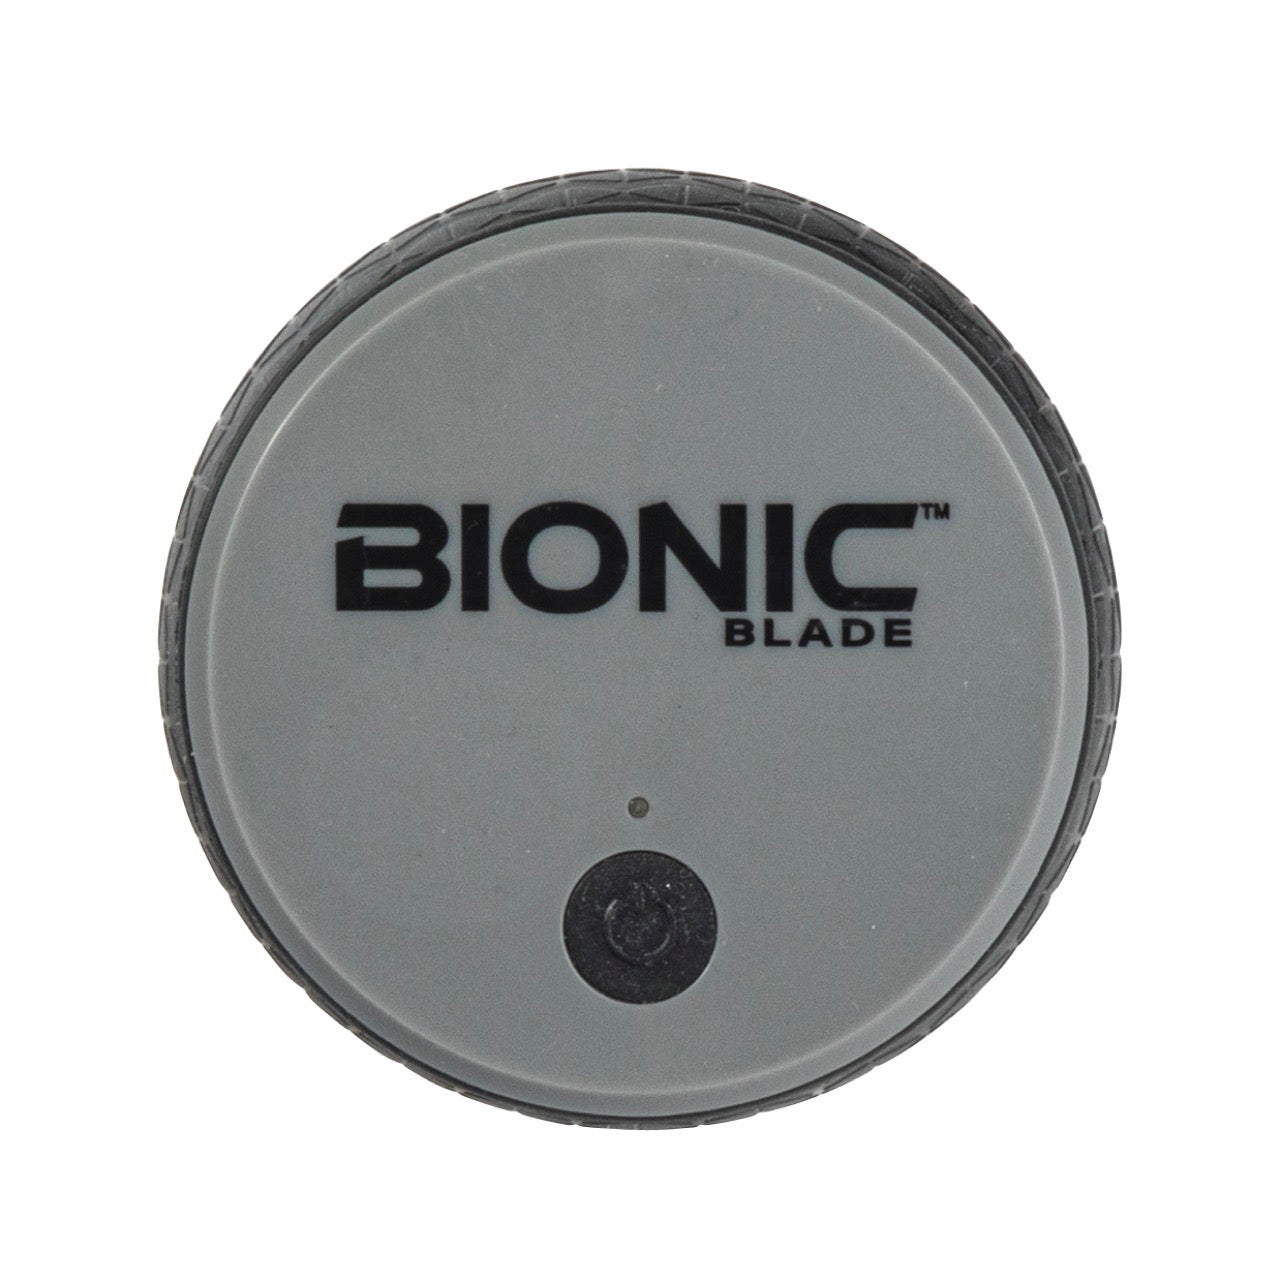 Bionic Blade Portable Blender - 18,000 RPM, USB Rechargeable Battery, –